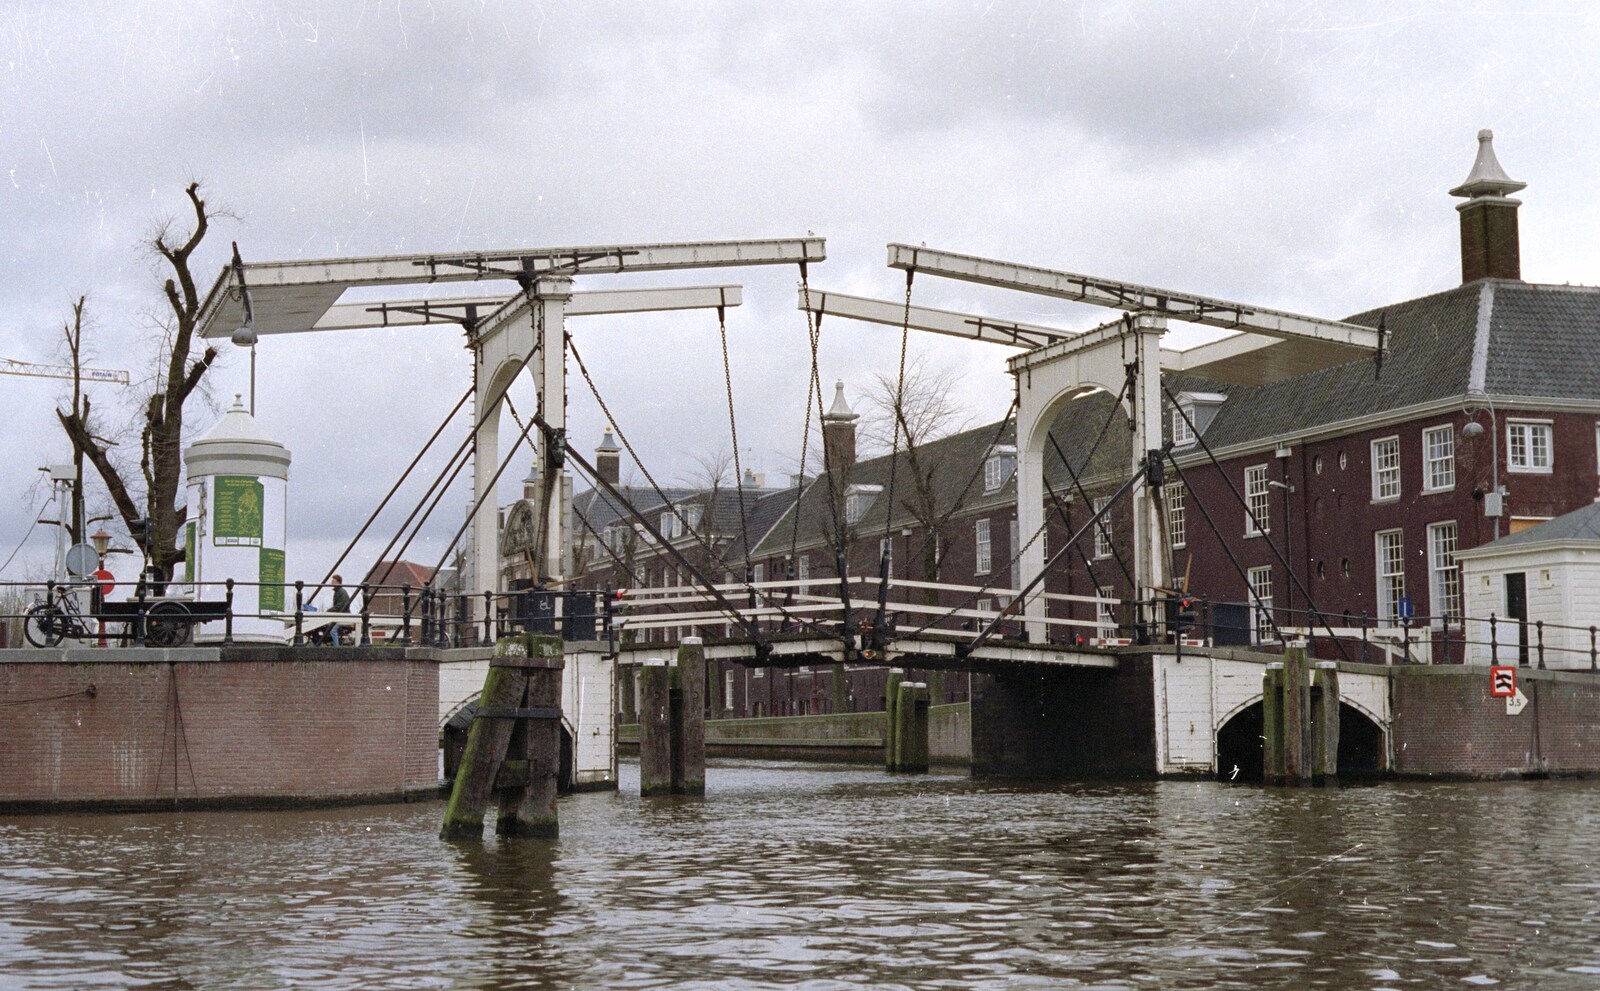 Out and About in Amsterdam, Hoorne, Vollendam and Edam, The Netherlands - 26th March 1992: The Magere Brug again